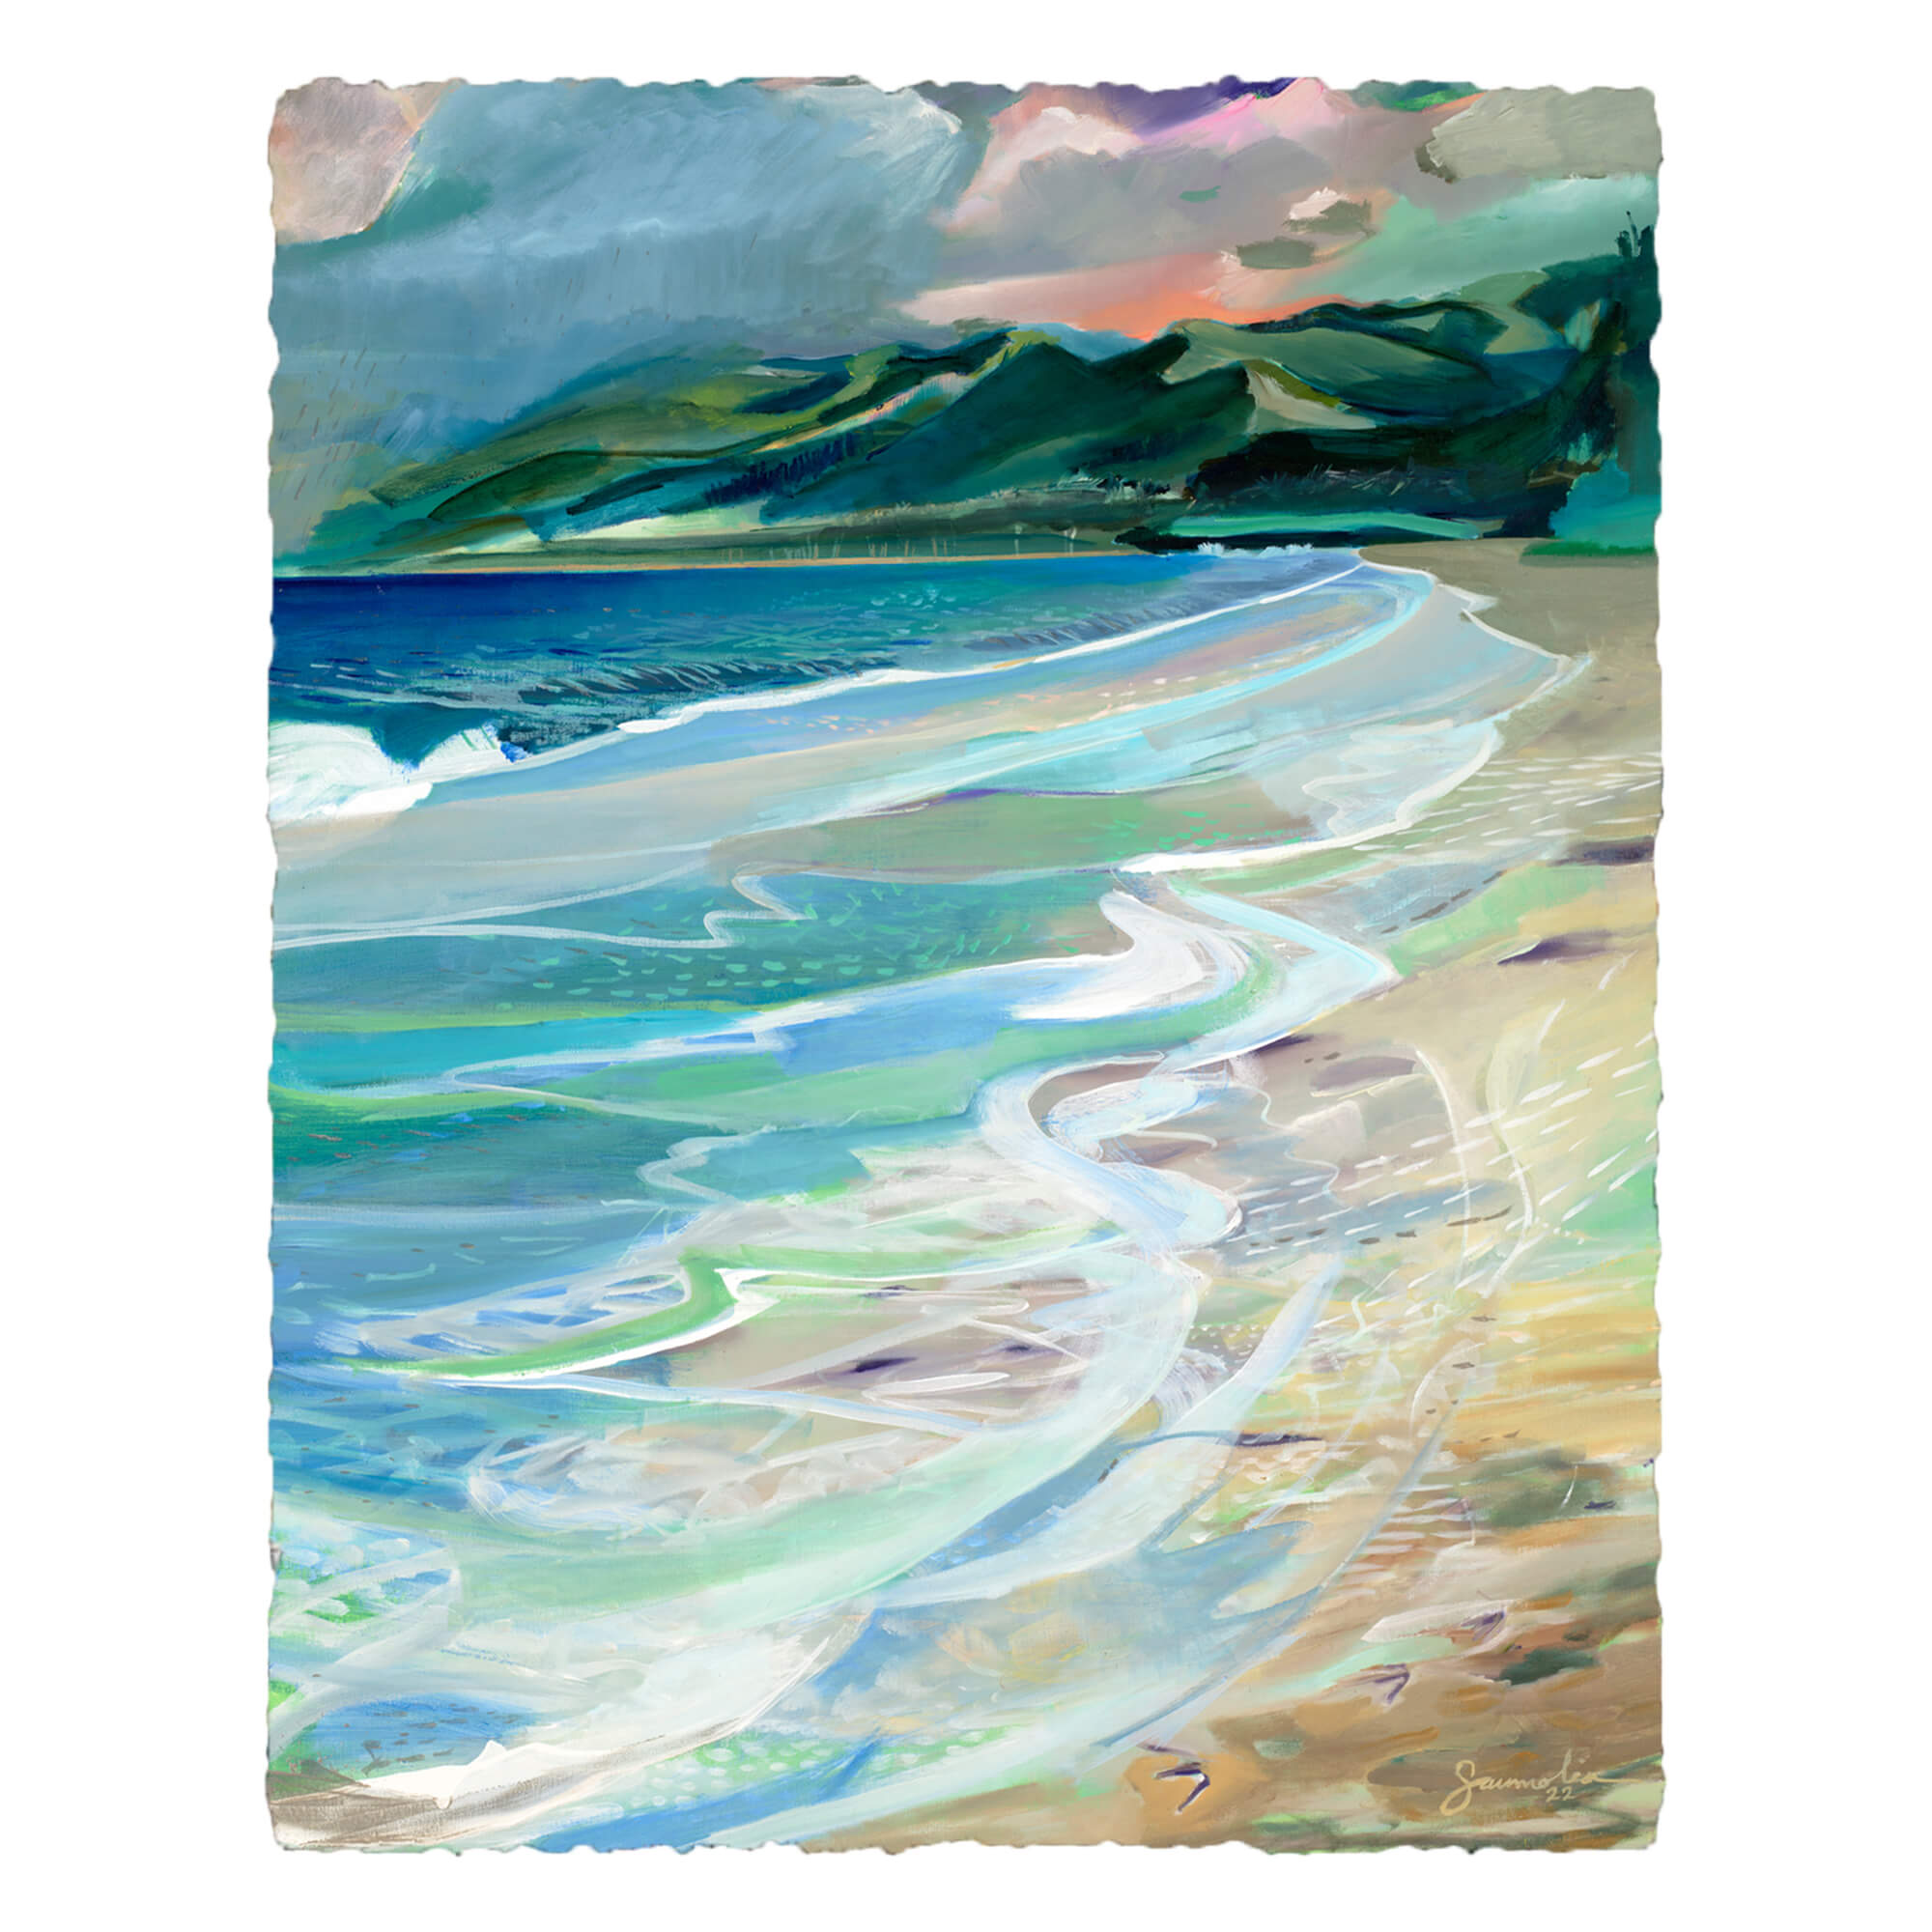 A watercolor paper giclée print featuring a beautiful abstract landscape with crashing waves and distant mountains by popular Hawaii artist Saumolia Puapuaga